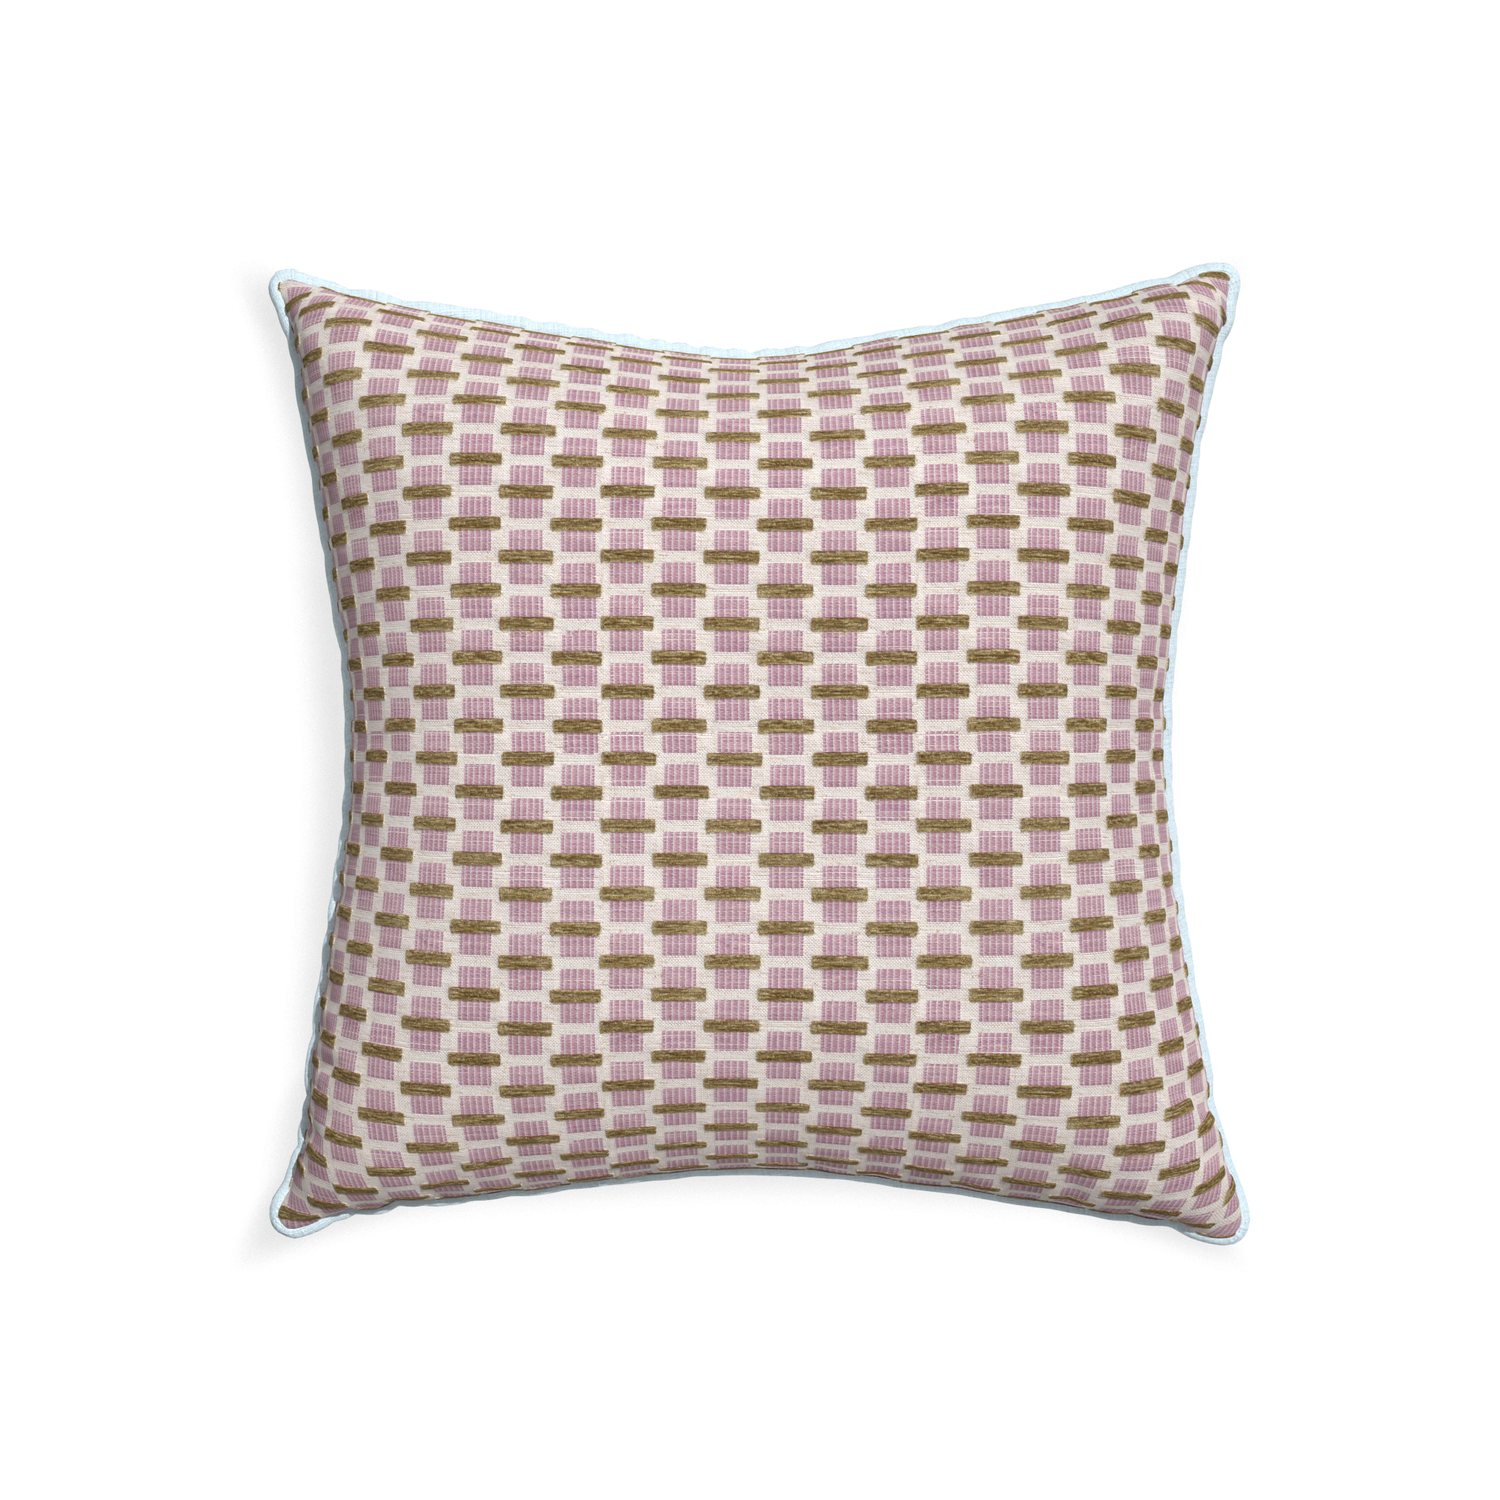 22-square willow orchid custom pink geometric chenillepillow with powder piping on white background